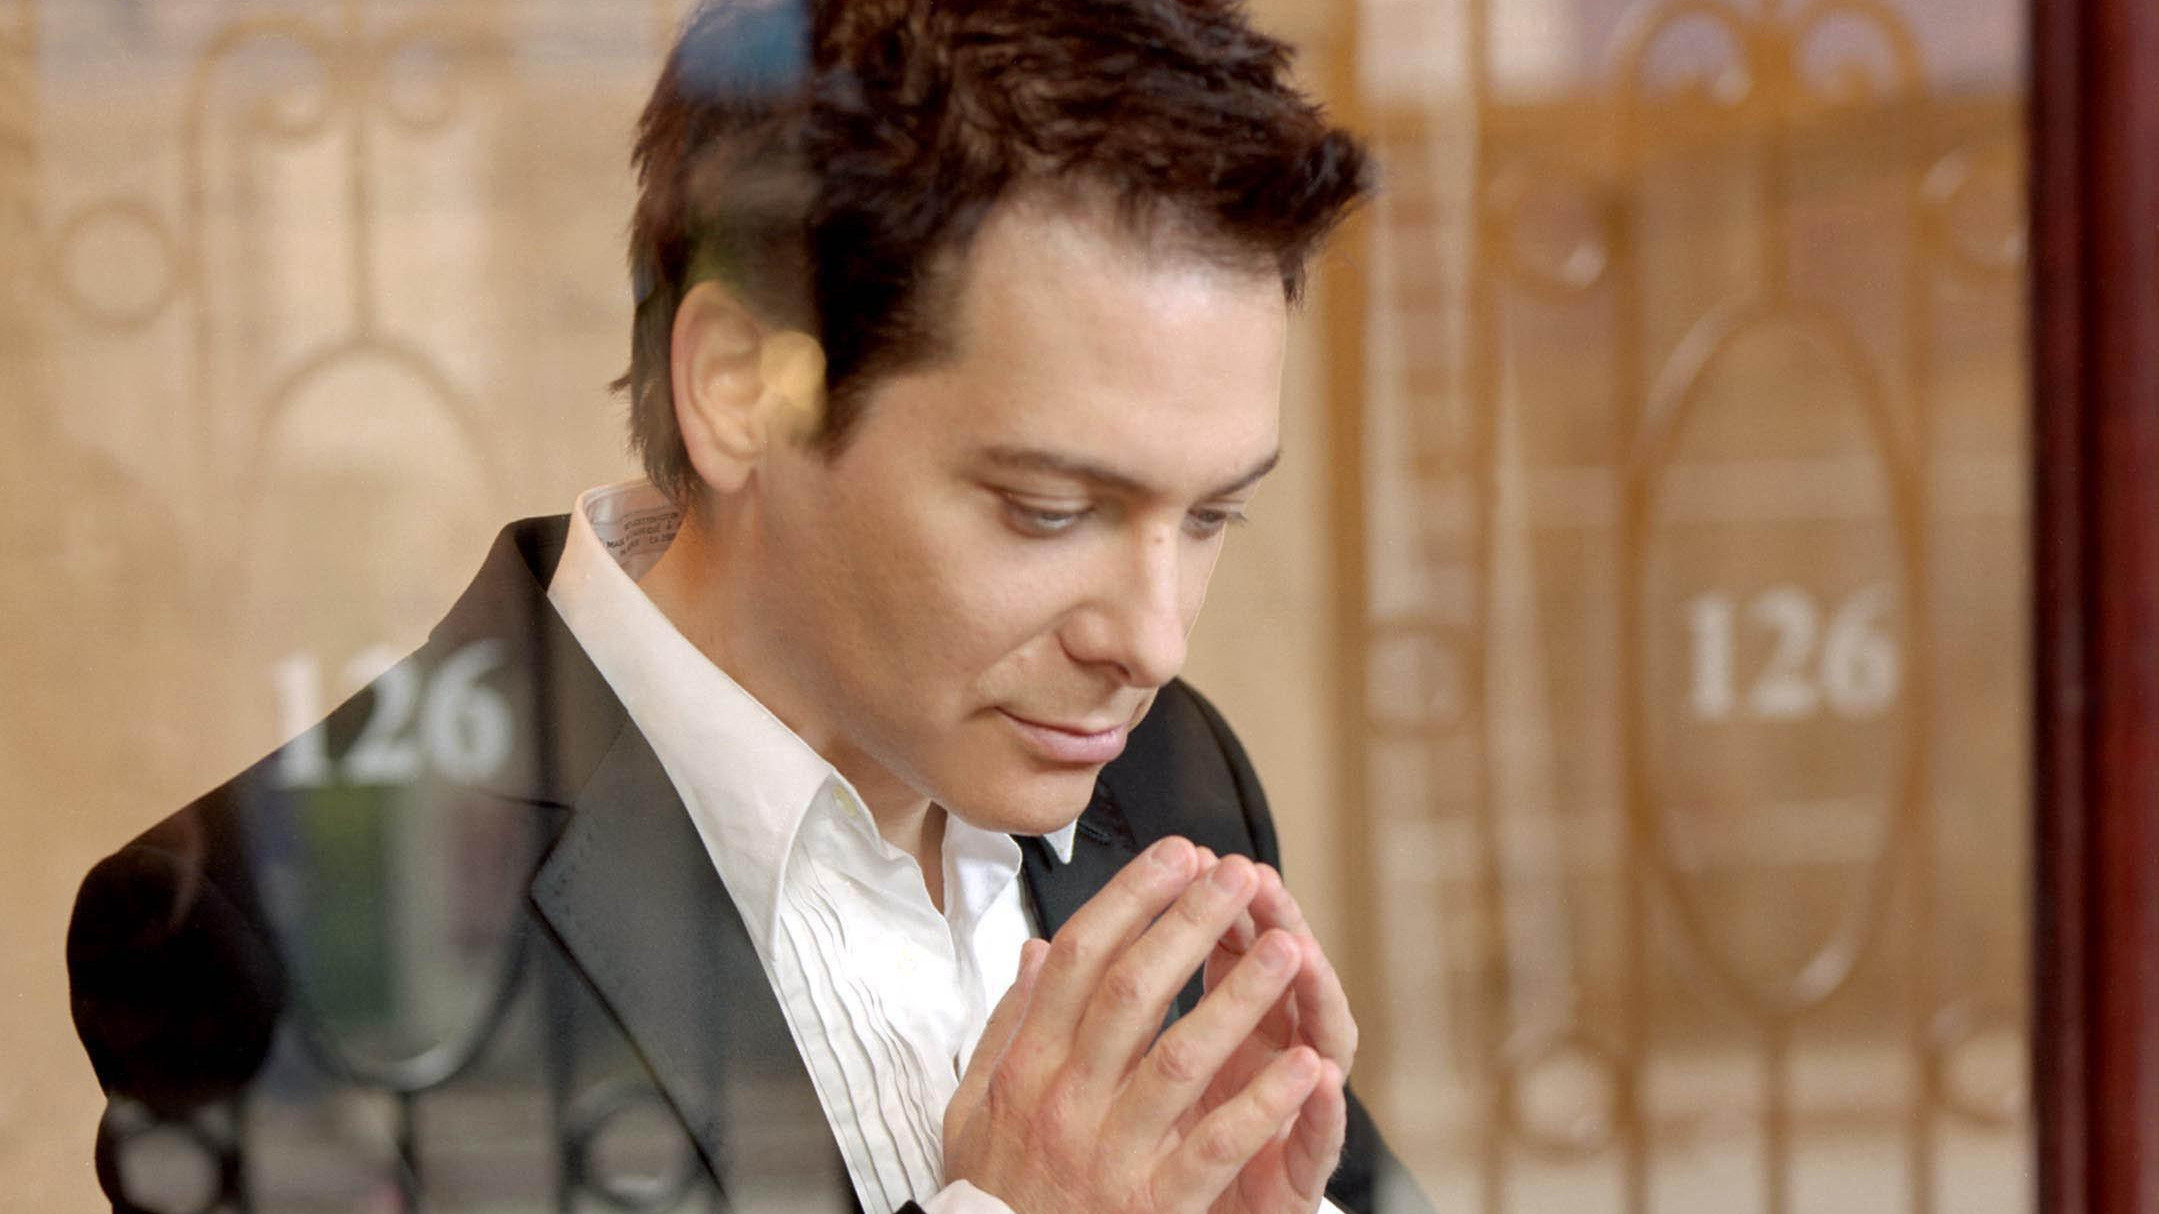 Amazing performance by Michael Feinstein singing a medley of 